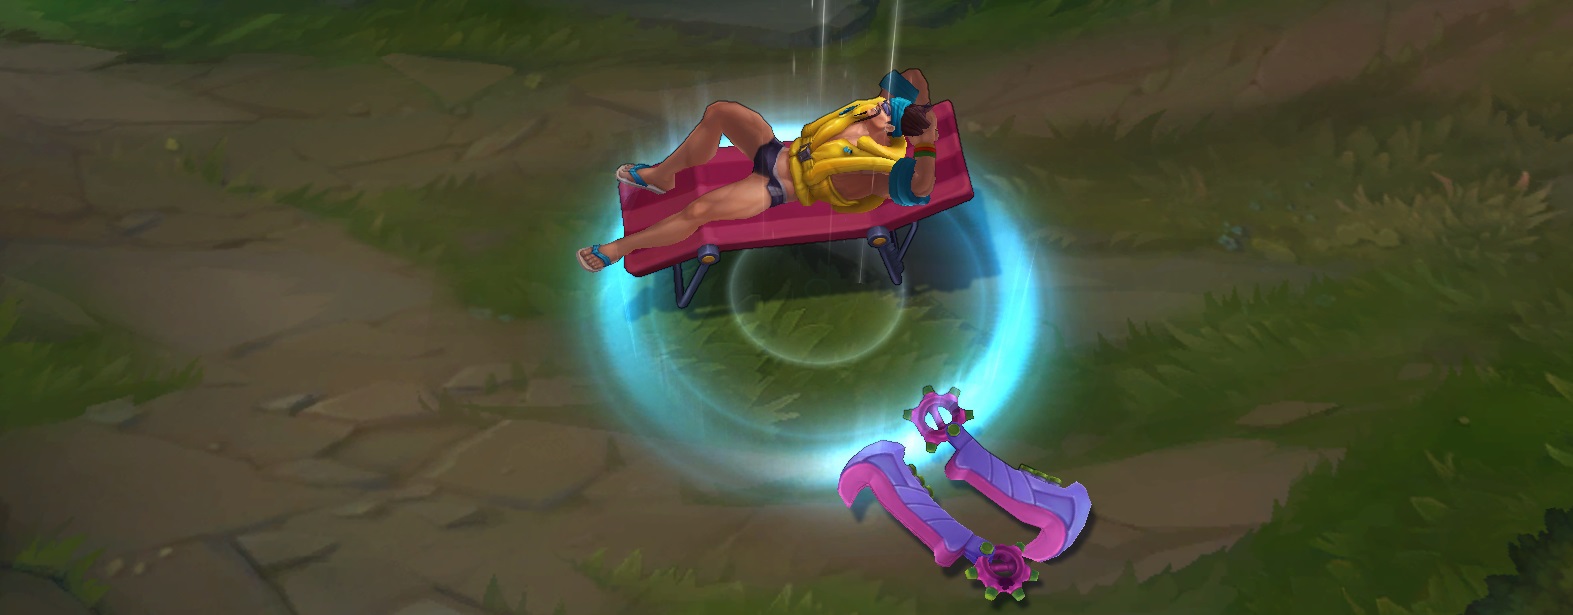 pool party draven skin recall animation